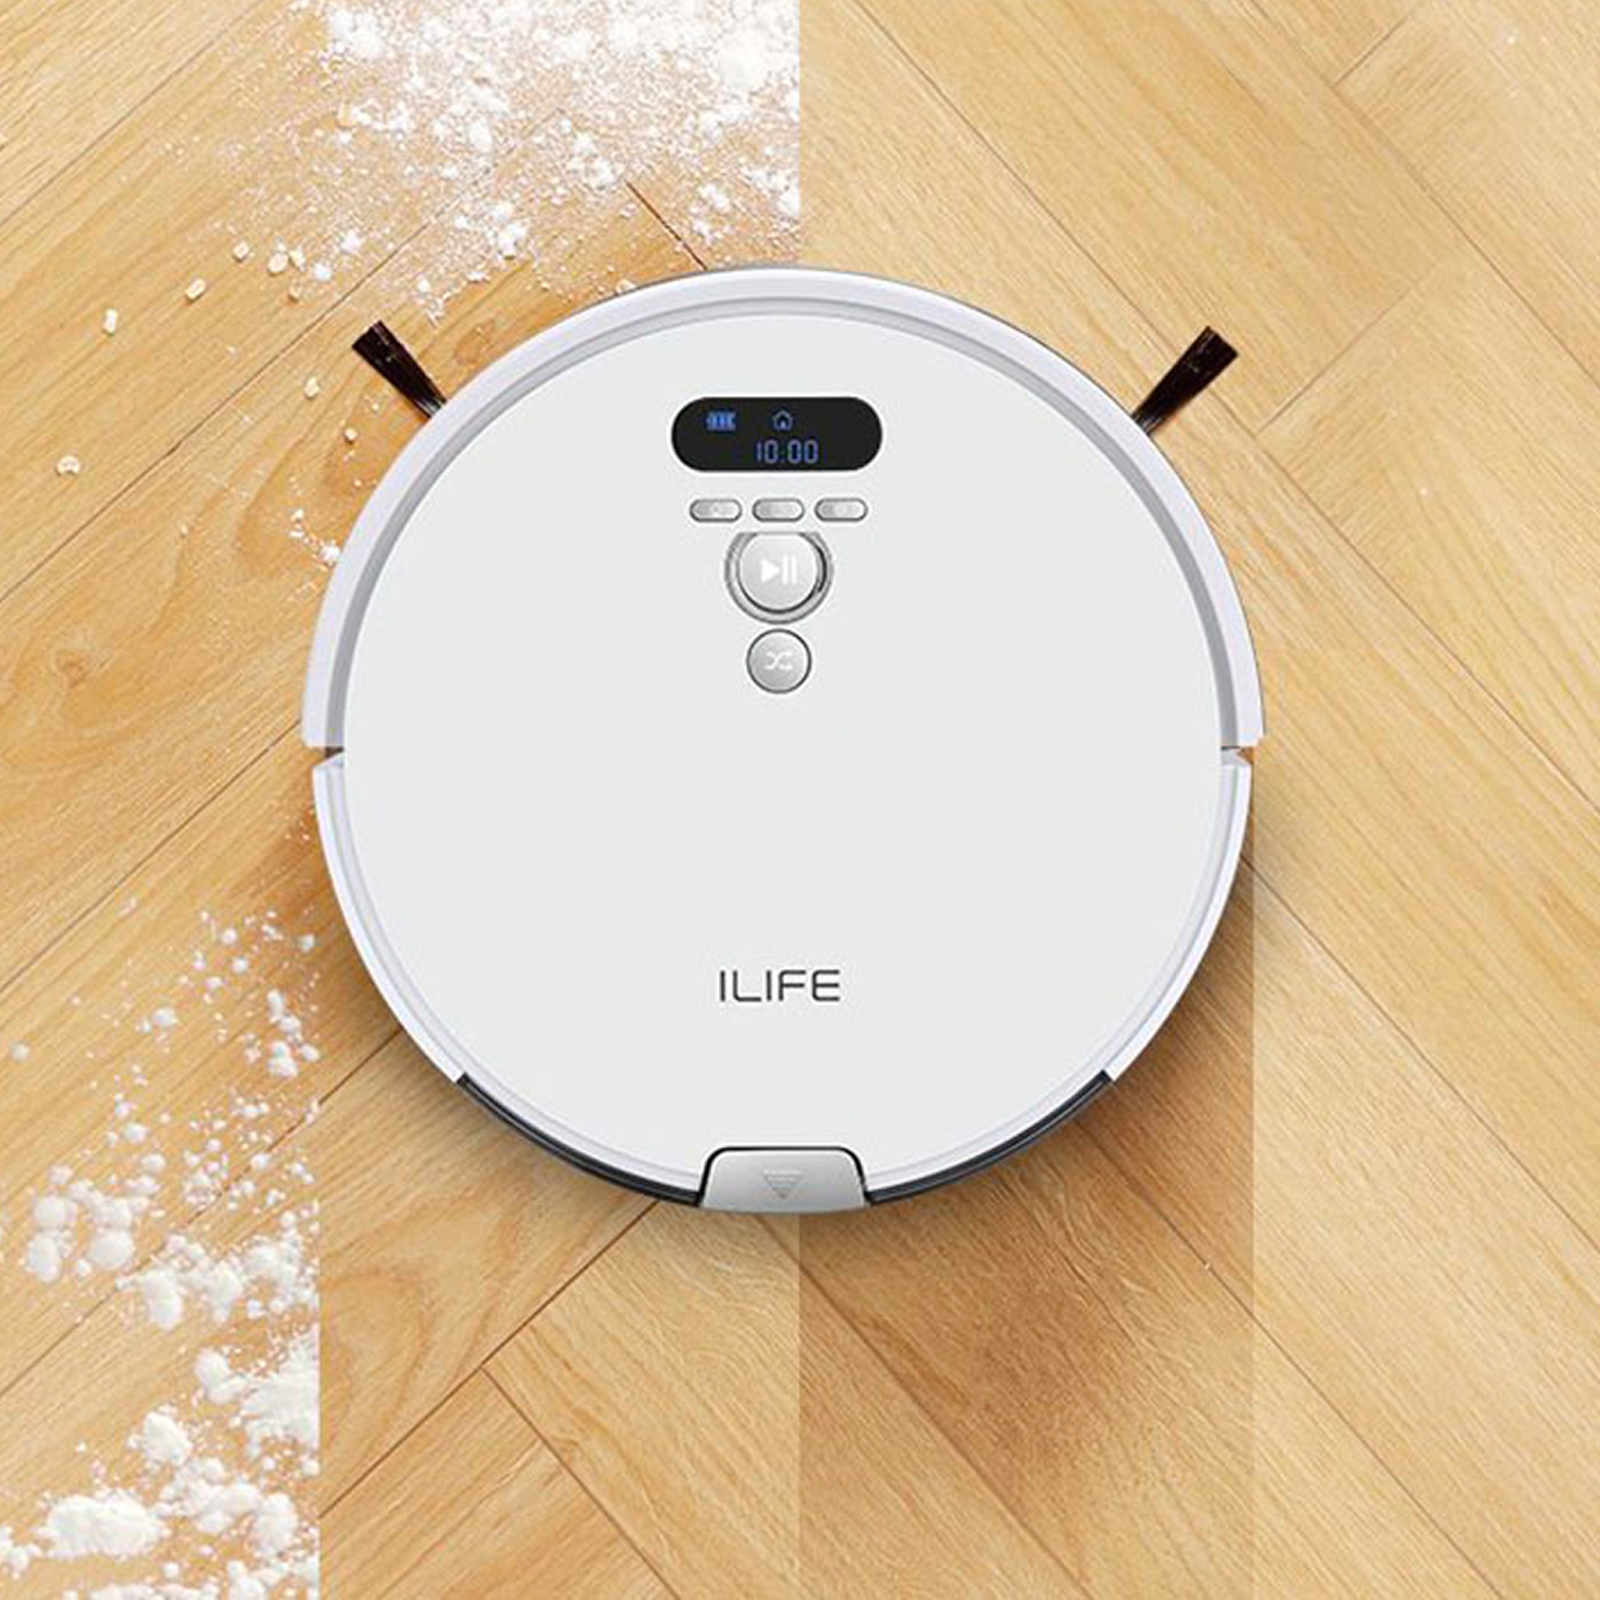 ILIFE V8 Plus is a robotic vacuum cleaner with mopping priced under €80!